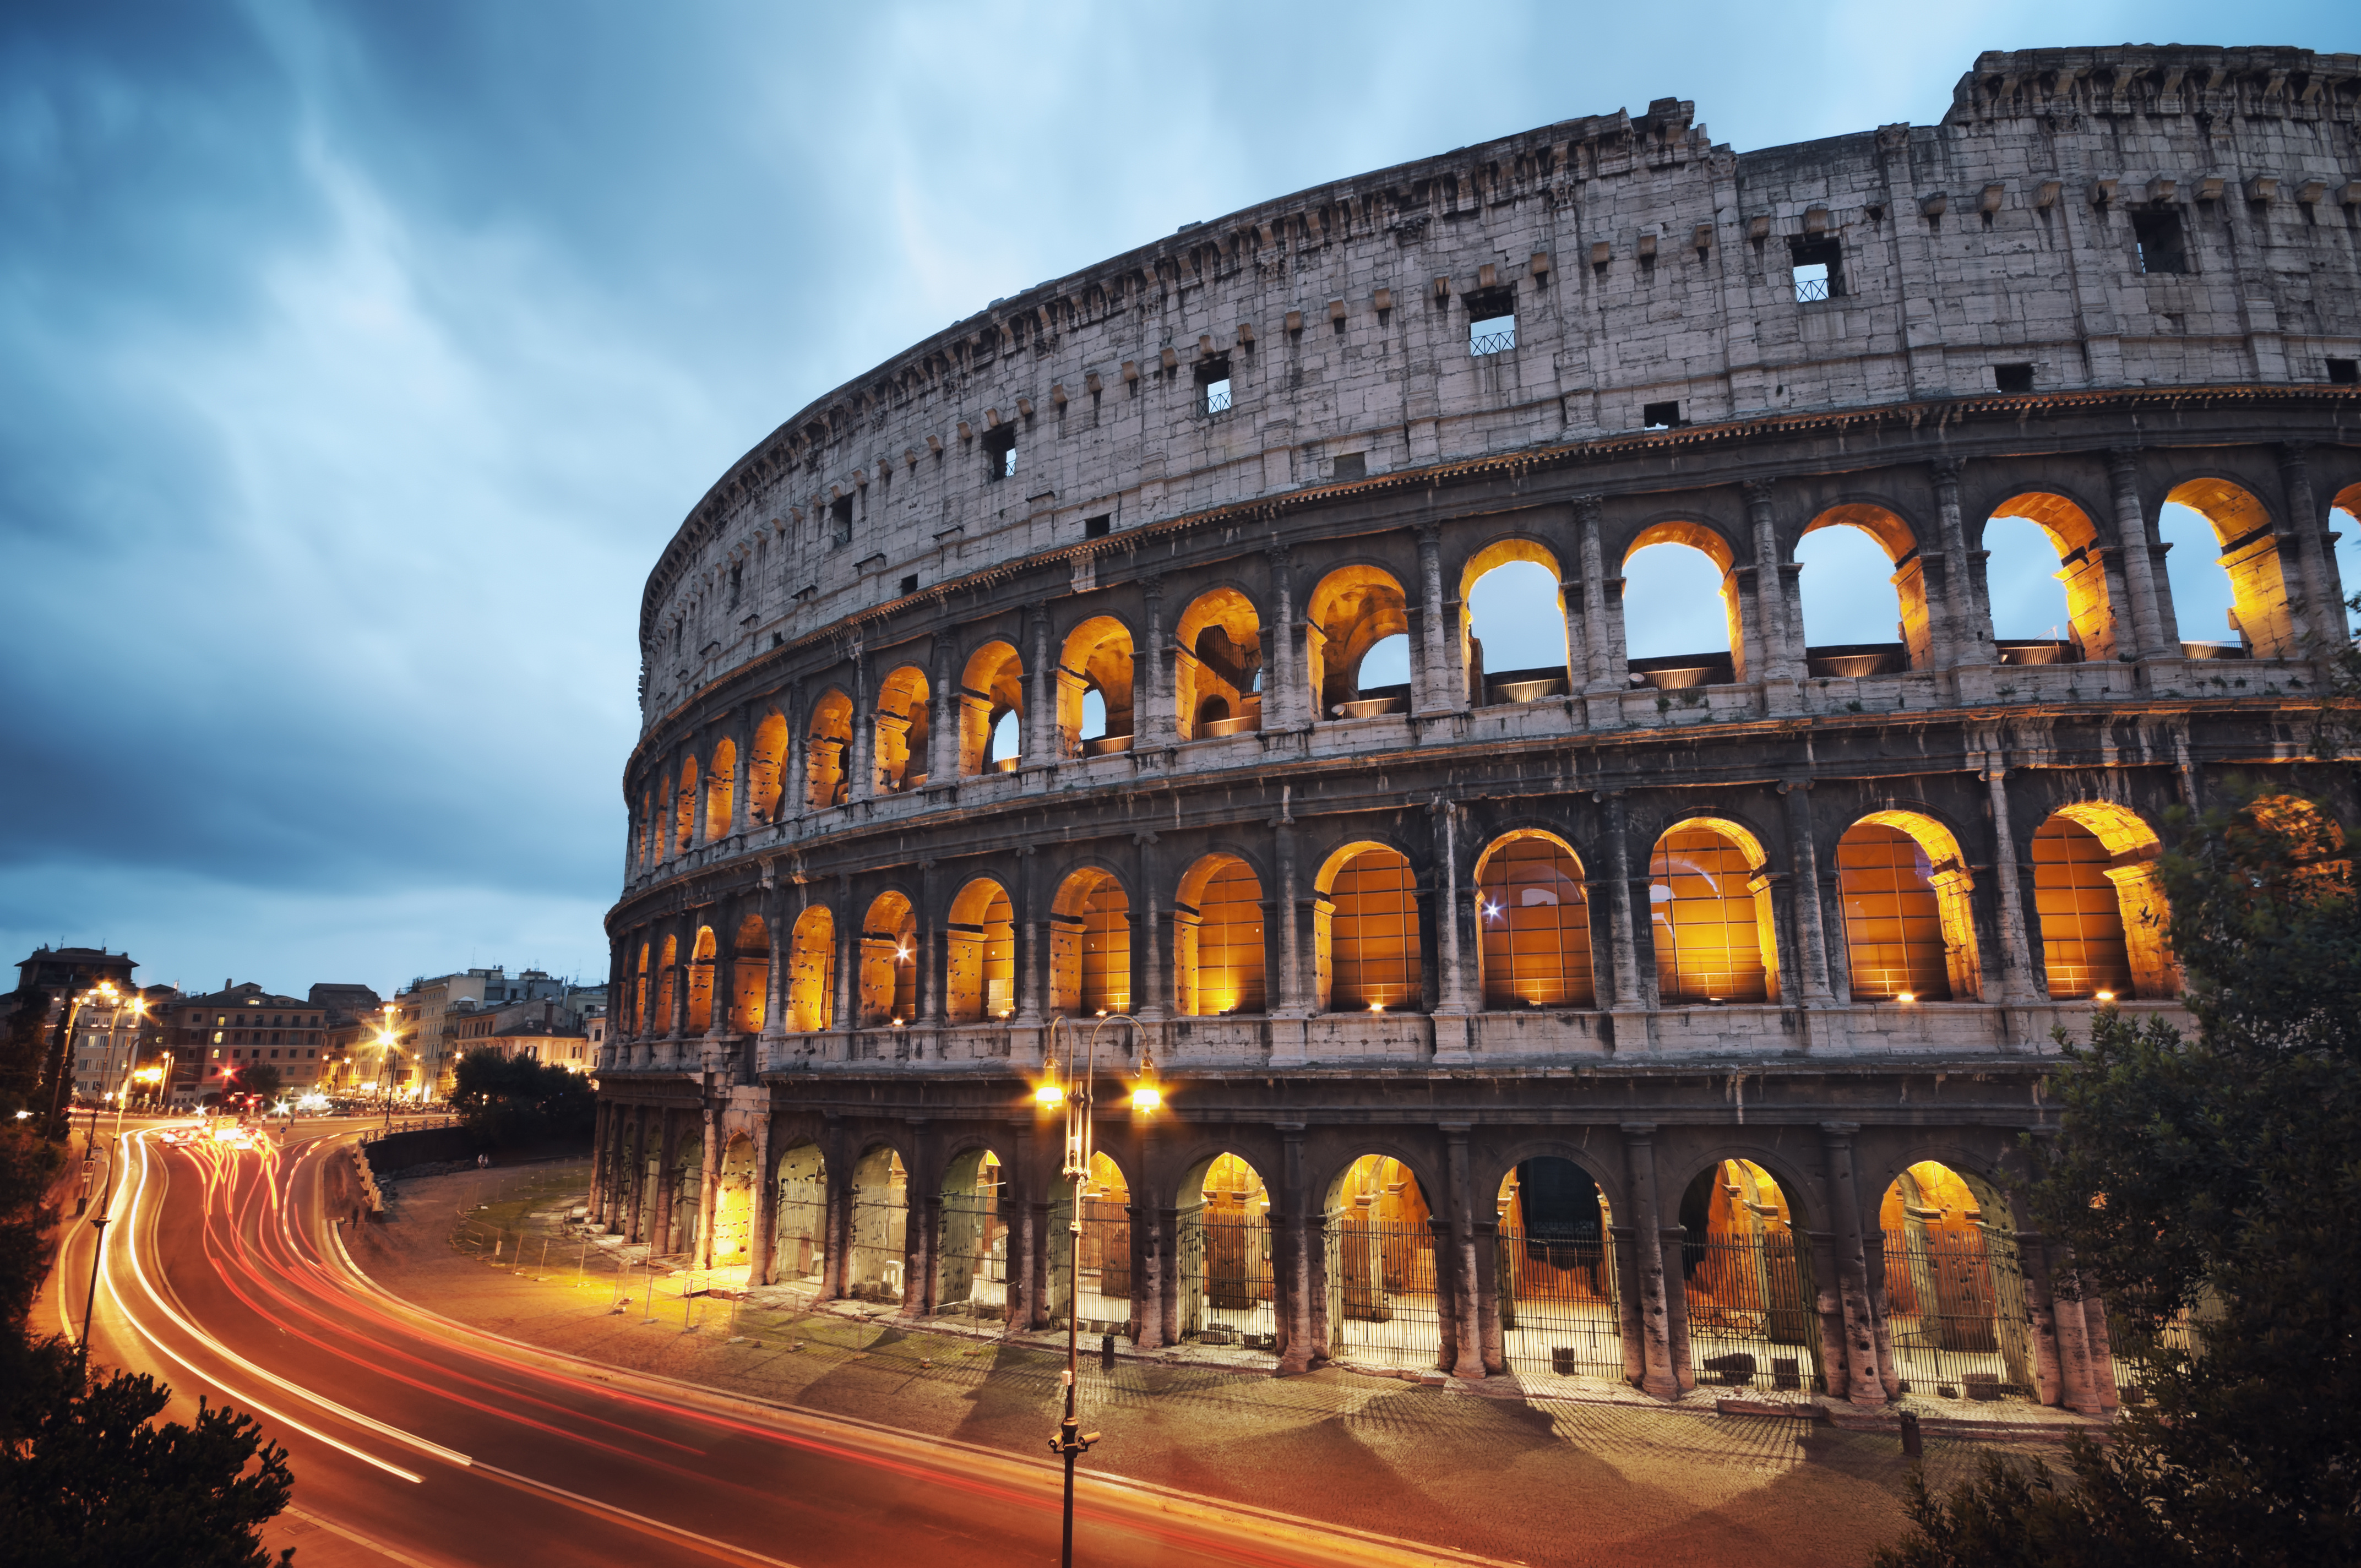 Roman Colosseum lit up in evening